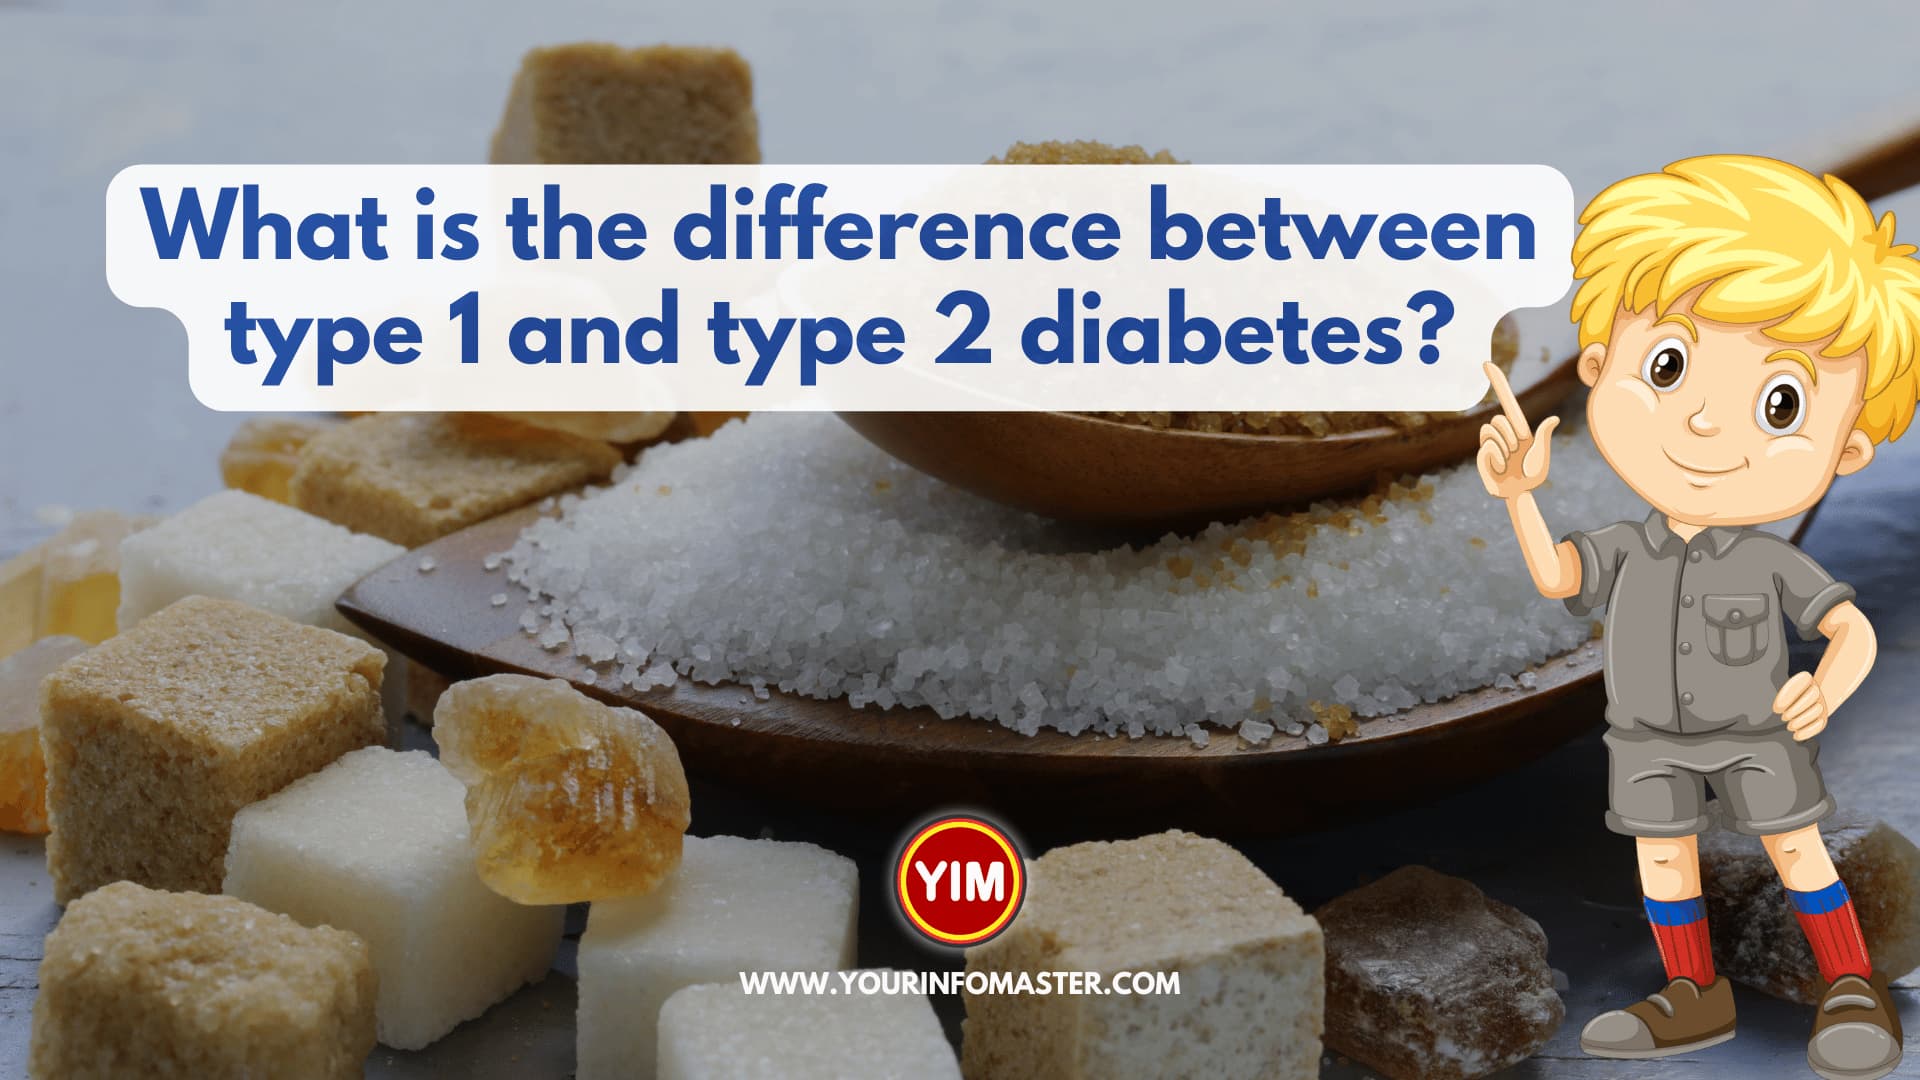 What is the difference between type 1 and type 2 diabetes